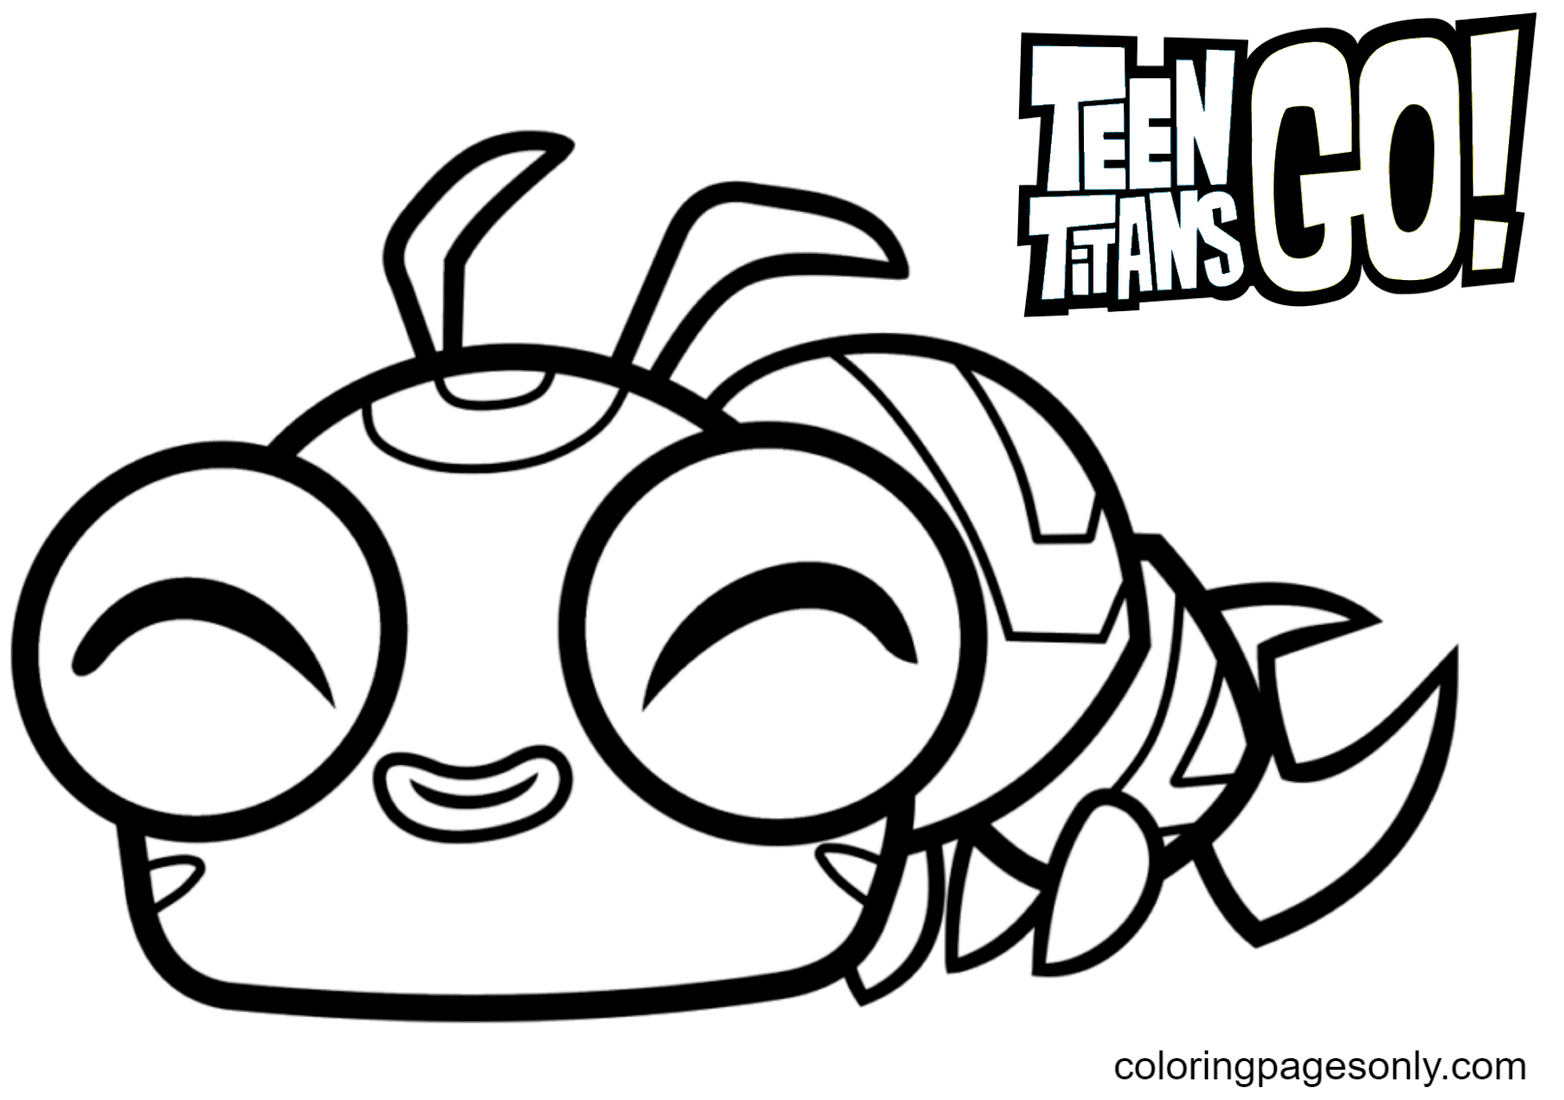 Silkie from Teen Titans Coloring Pages